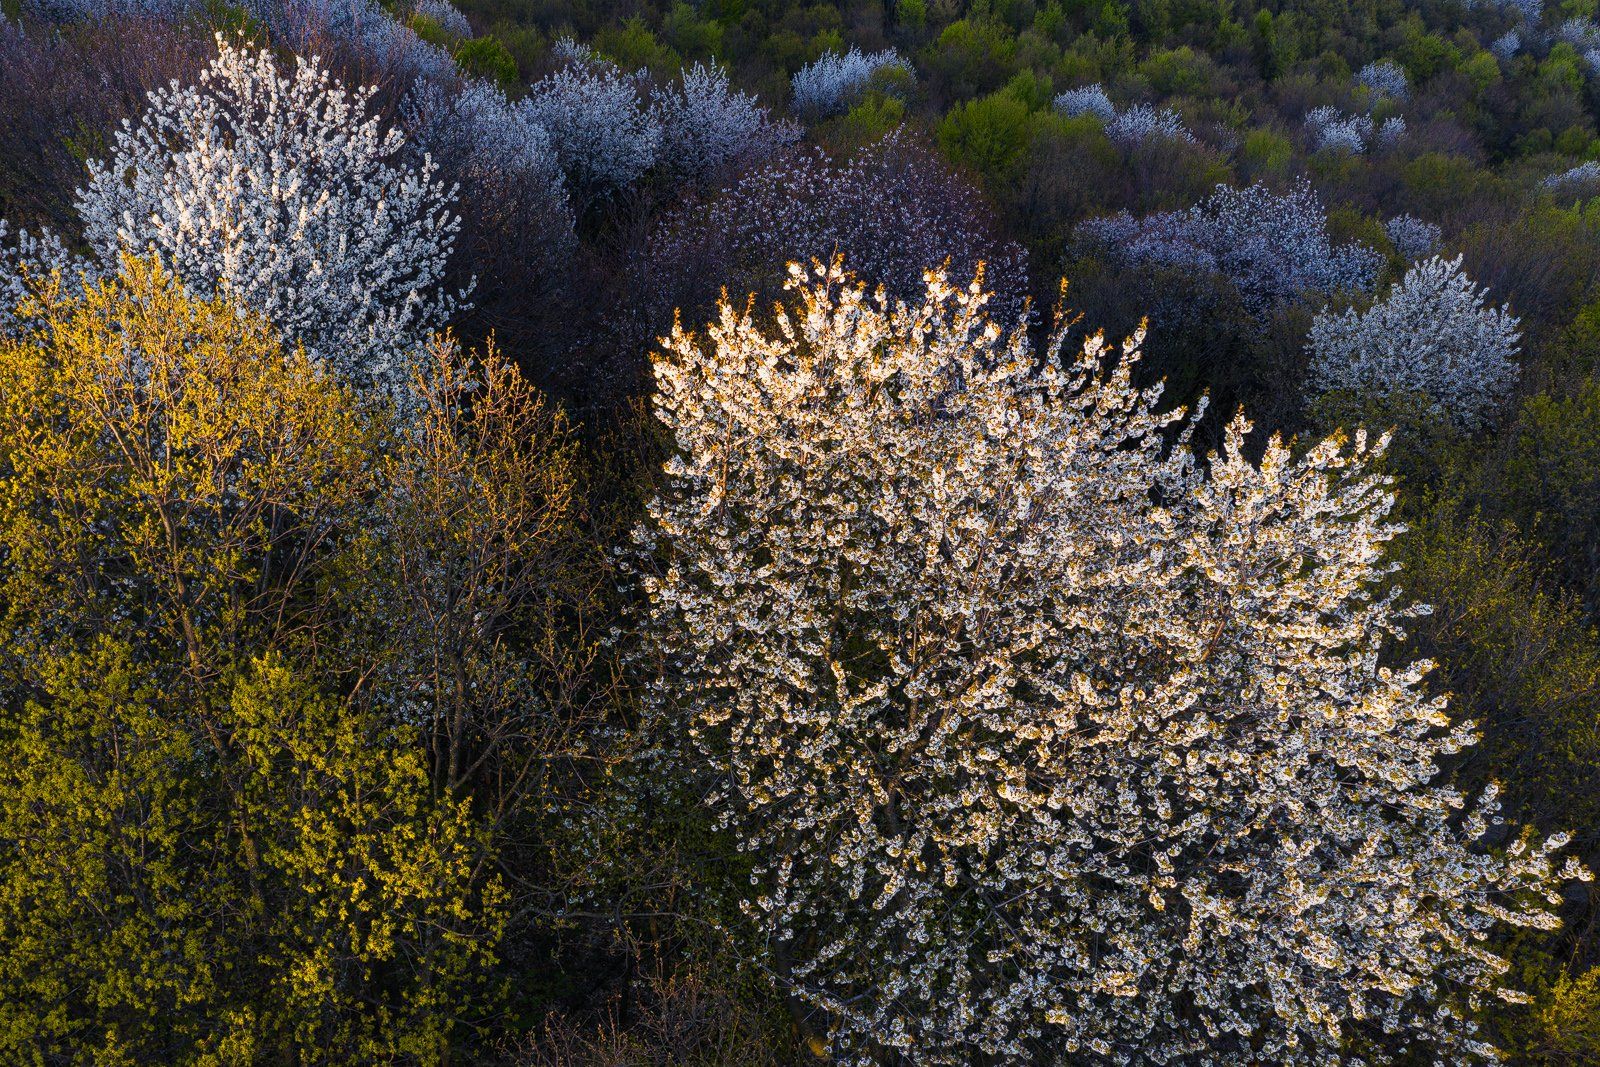 #aerial #nature #forest #blossom cherry #sunset light #natural light #landscape #aerial #drone photography, Gheorghe Popa